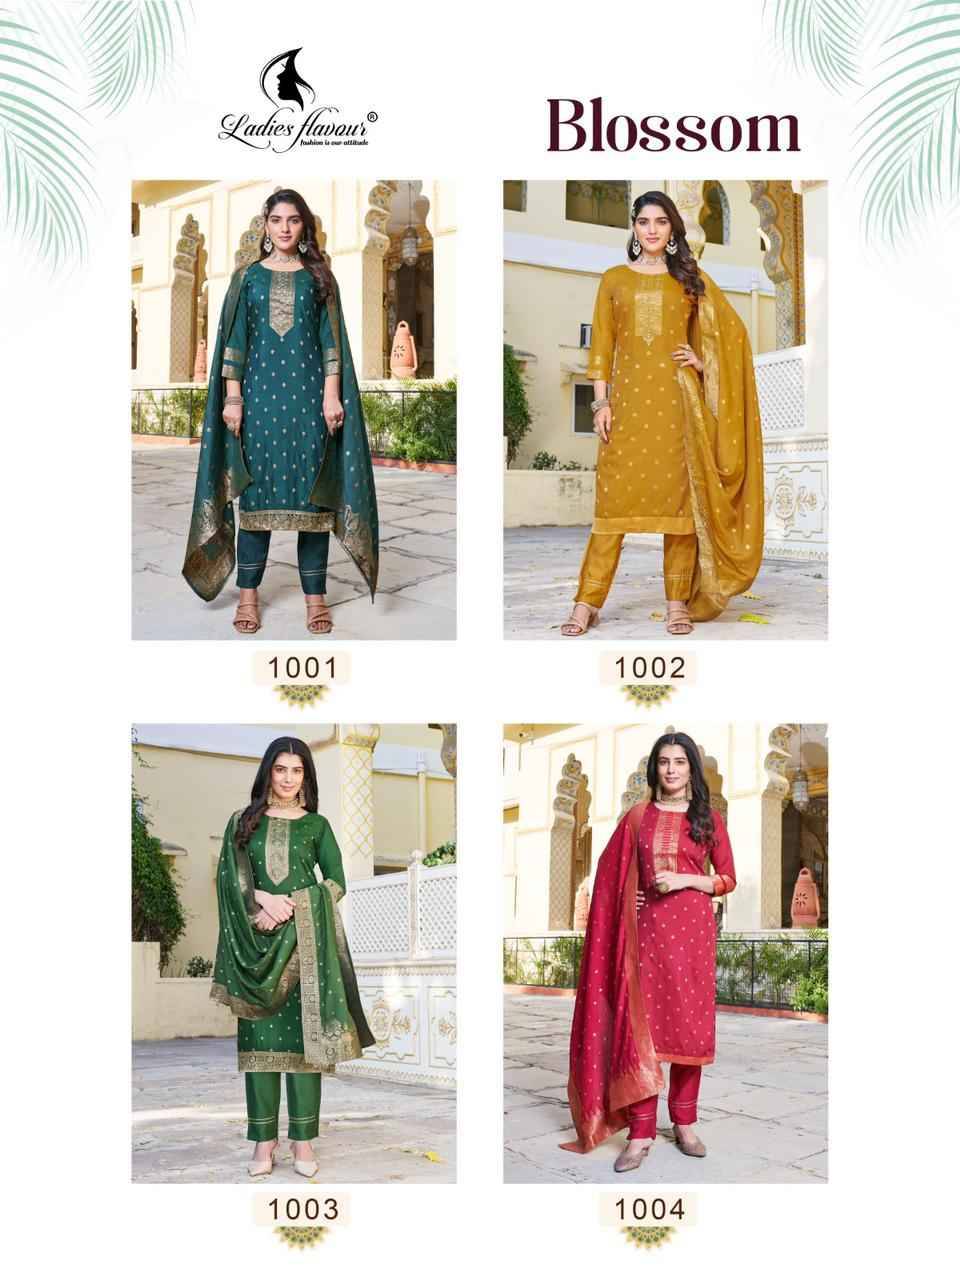 Blossom By Ladies Flavour 1001 To 1004 Series Beautiful Festive Suits Colorful Stylish Fancy Casual Wear & Ethnic Wear Chanderi Dola Jacquard Dresses At Wholesale Price